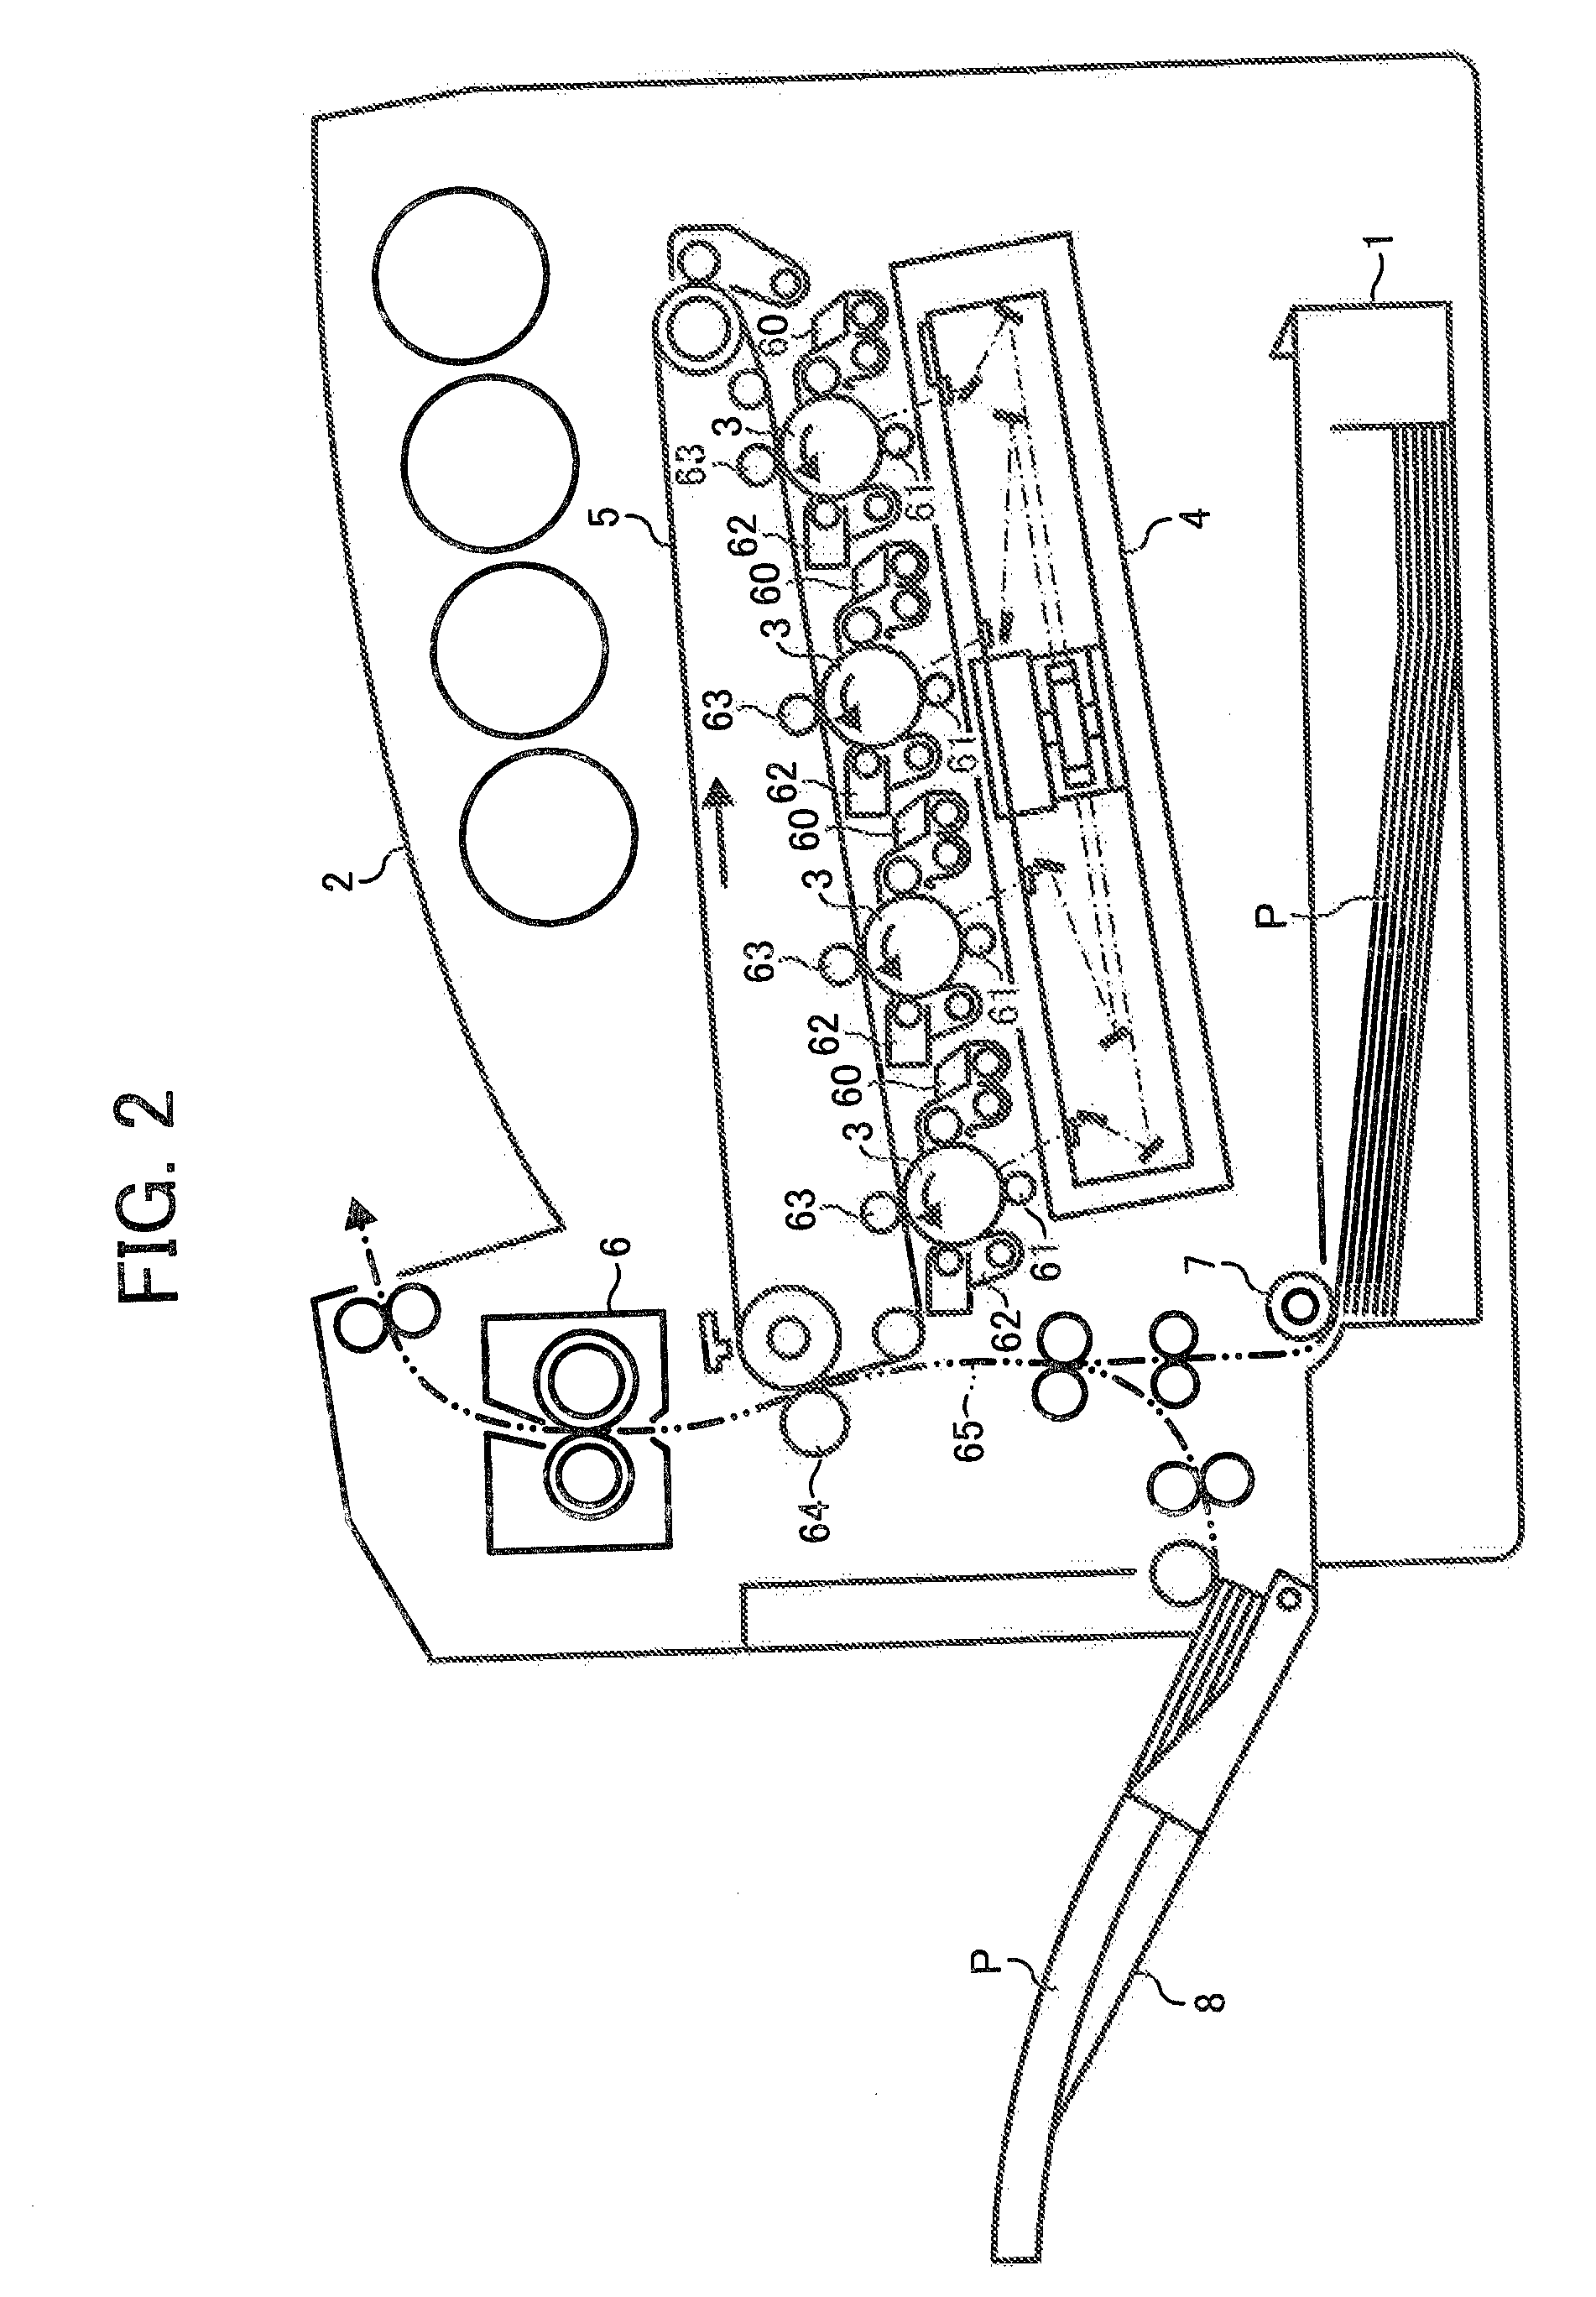 Sheet feeding cassette and image forming apparatus